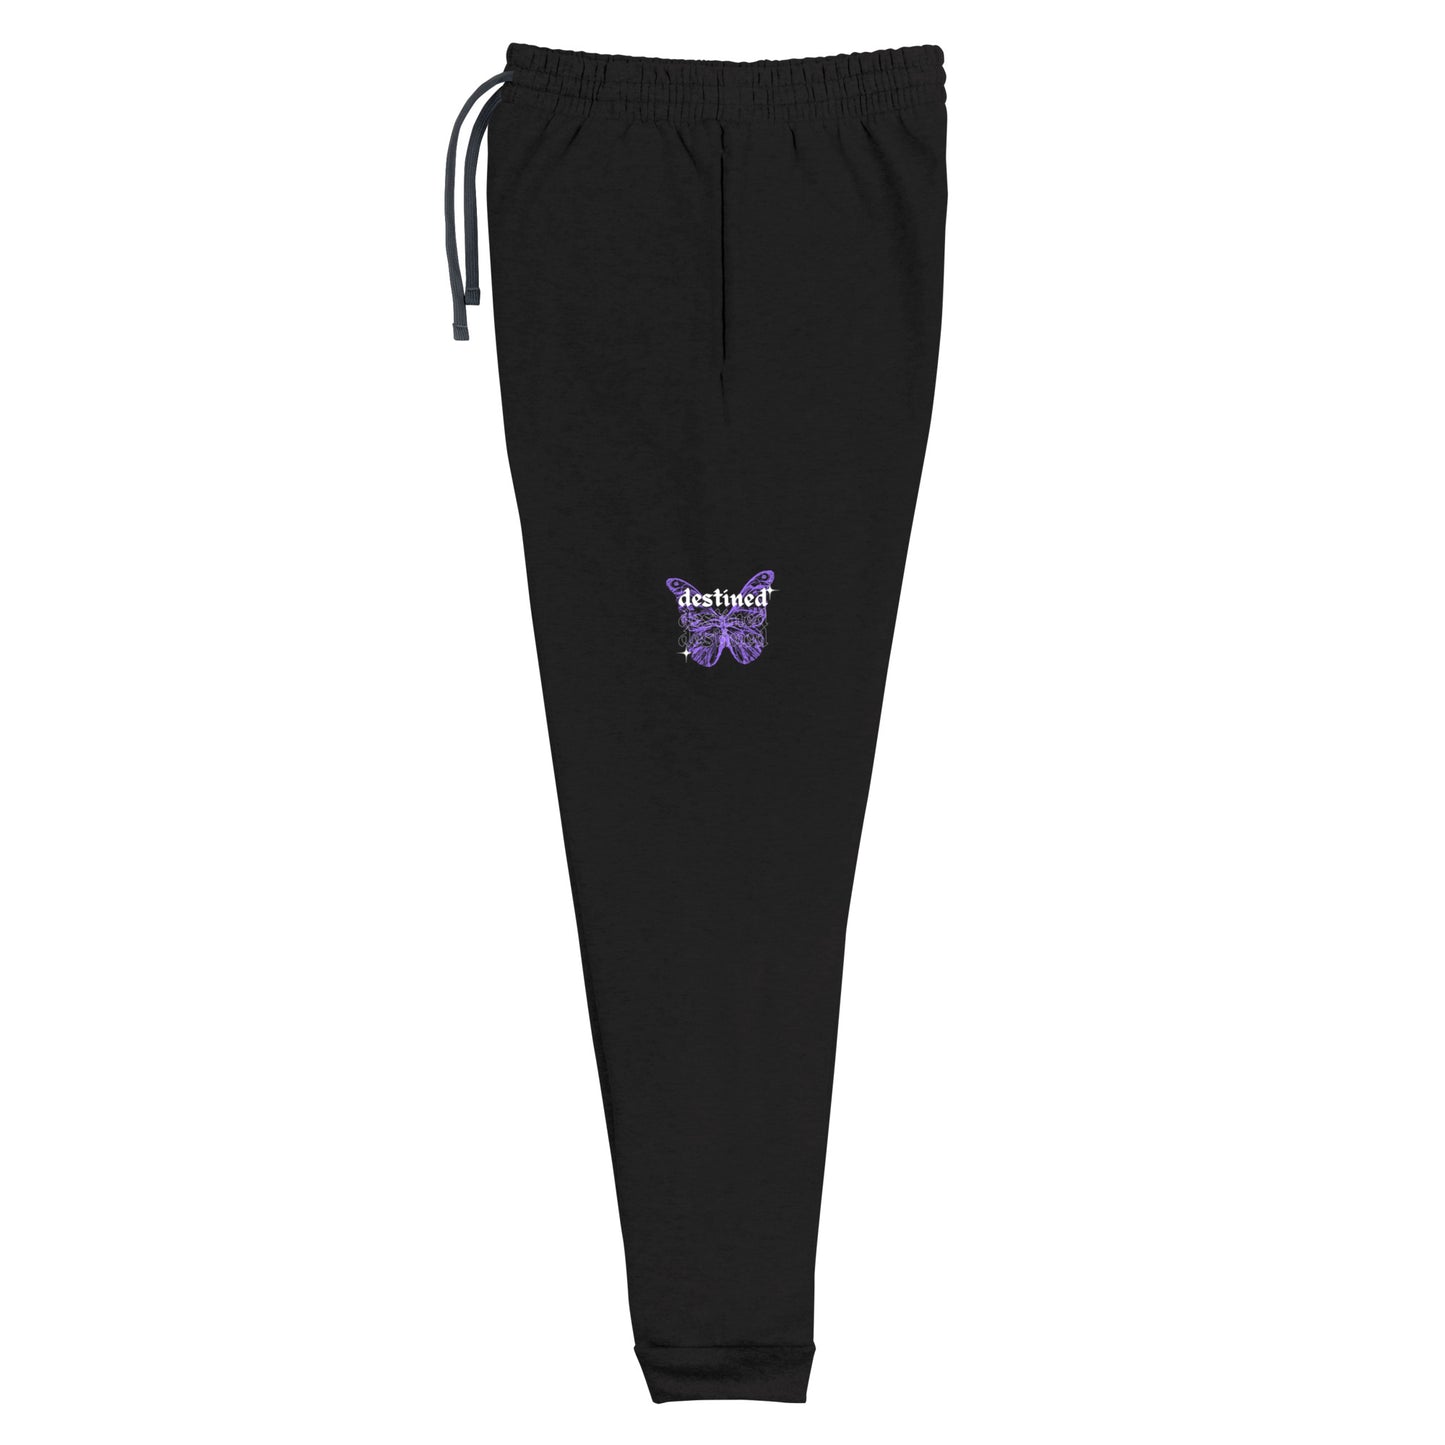 "destined" joggers